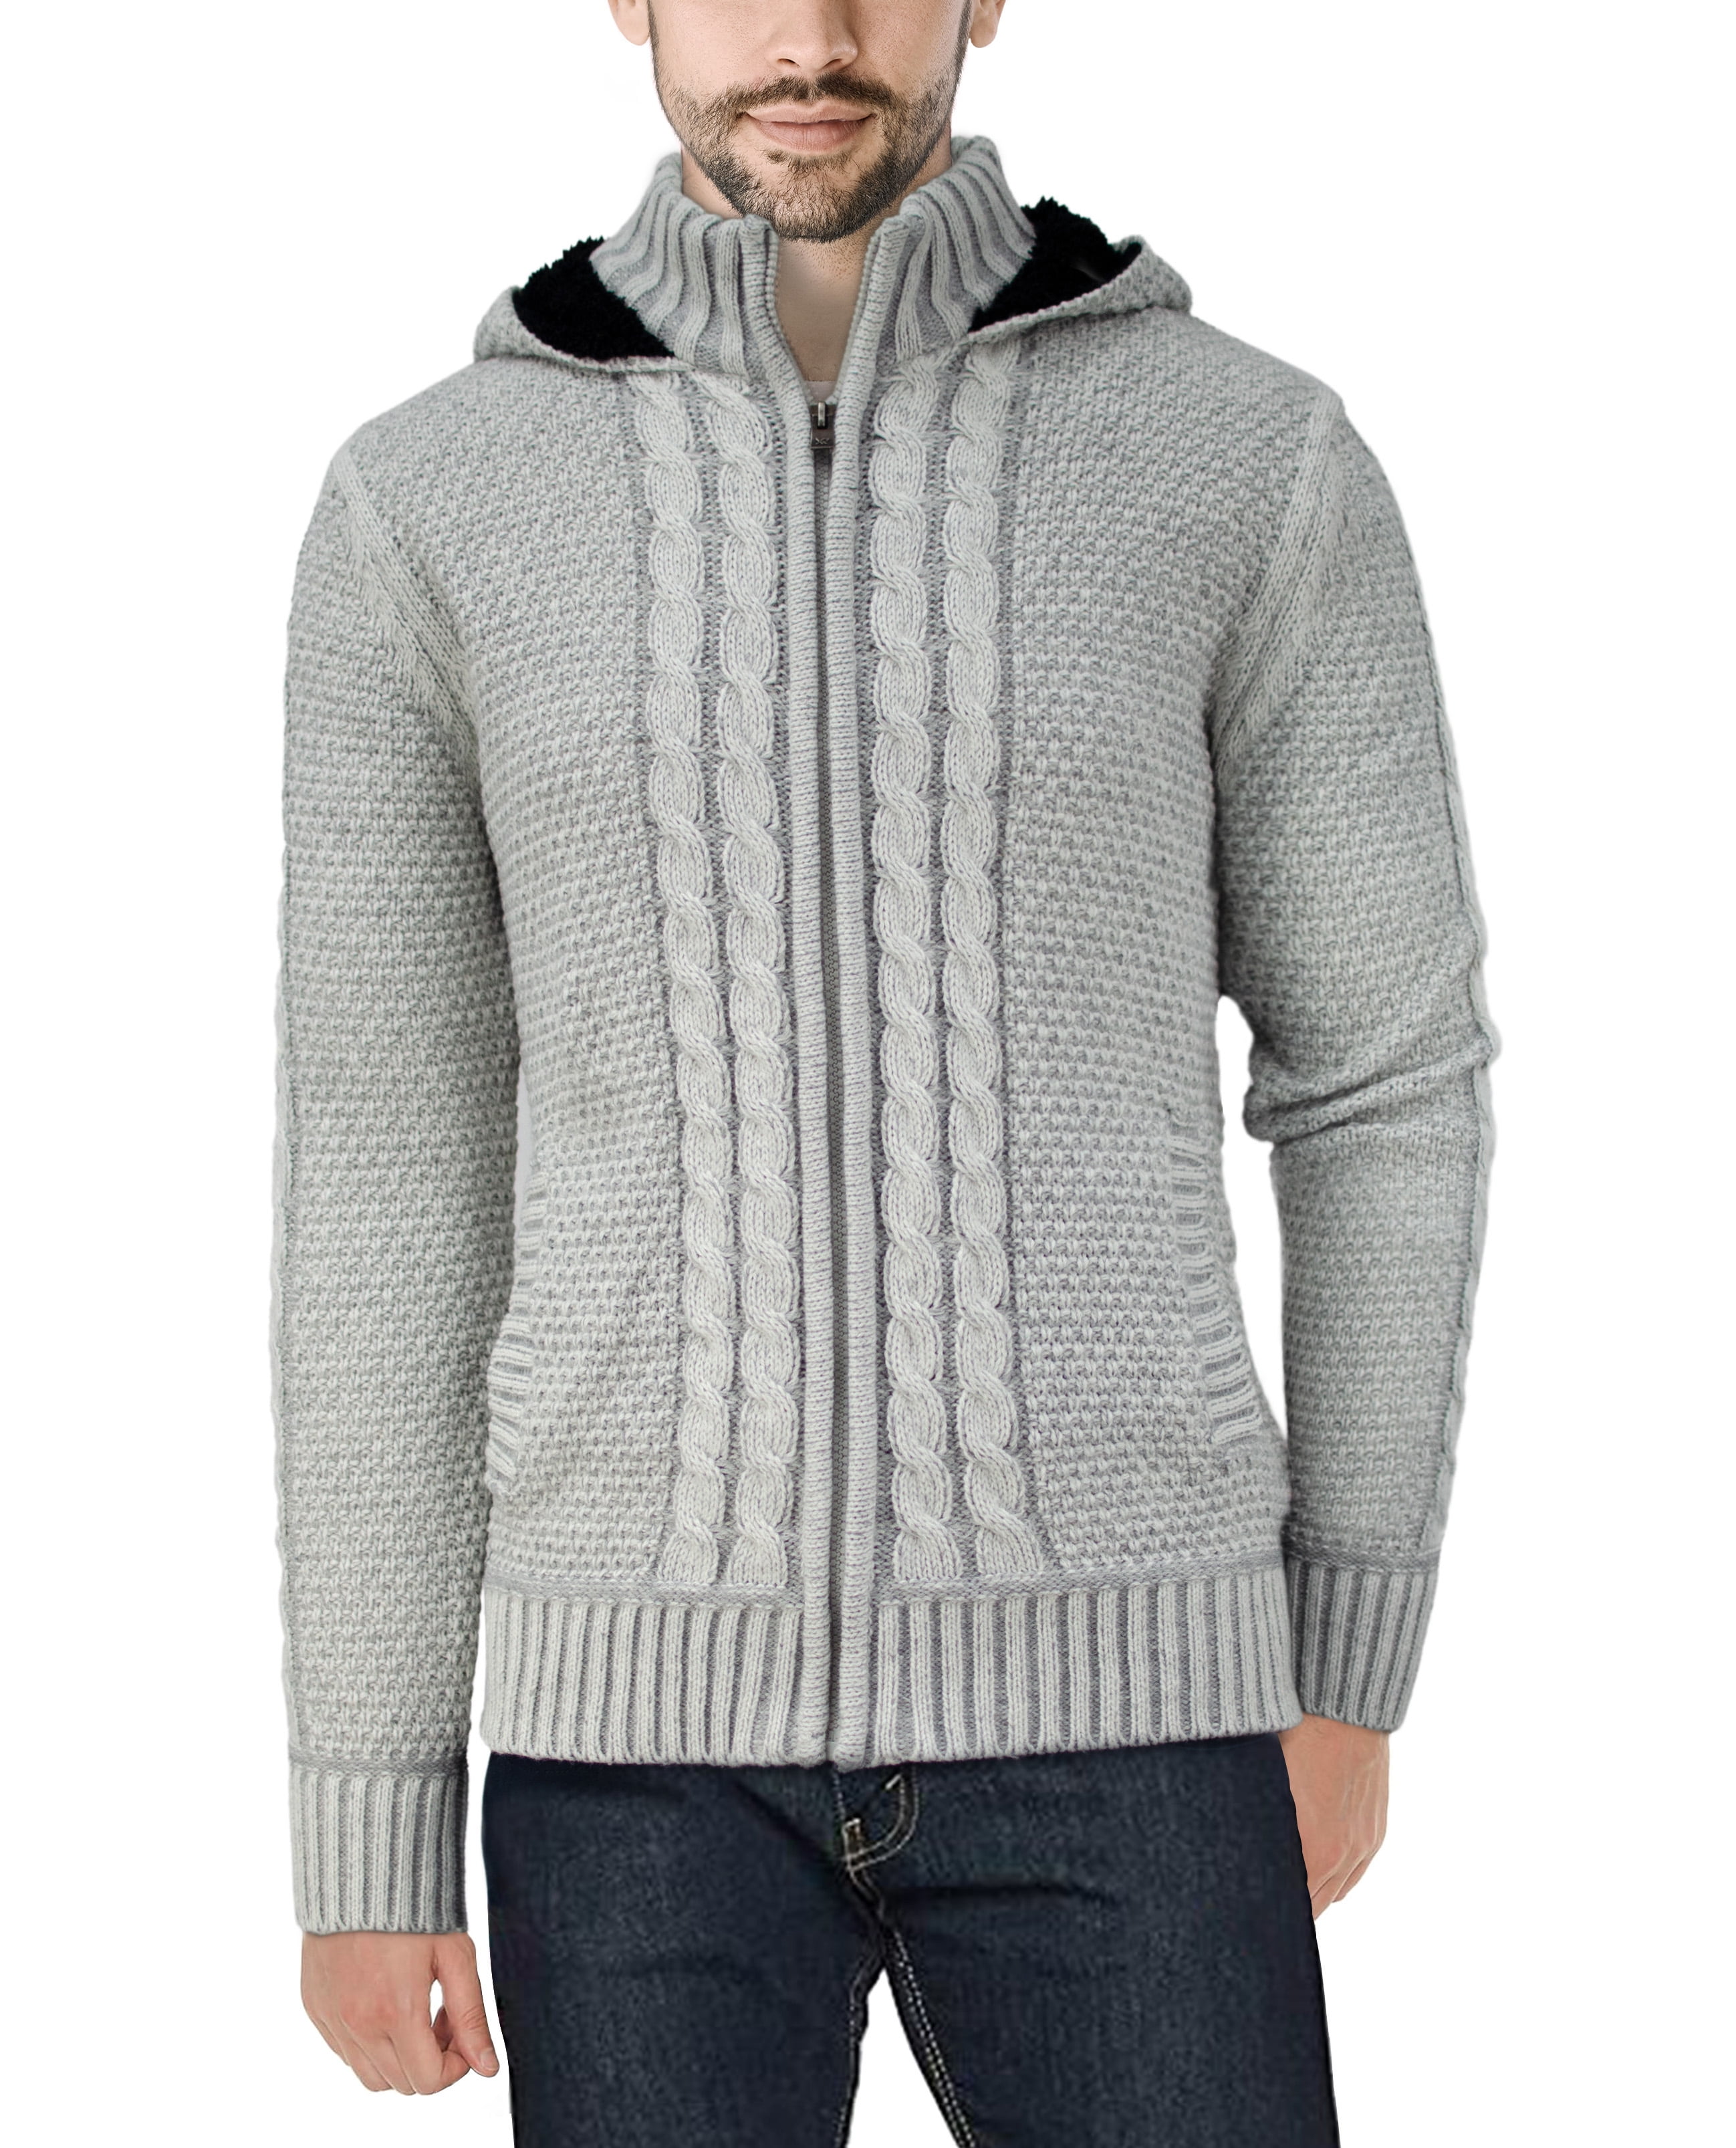 X RAY Men's Casual Slim Fit Knitted Cardigan Sweater Full Zippered Long ...